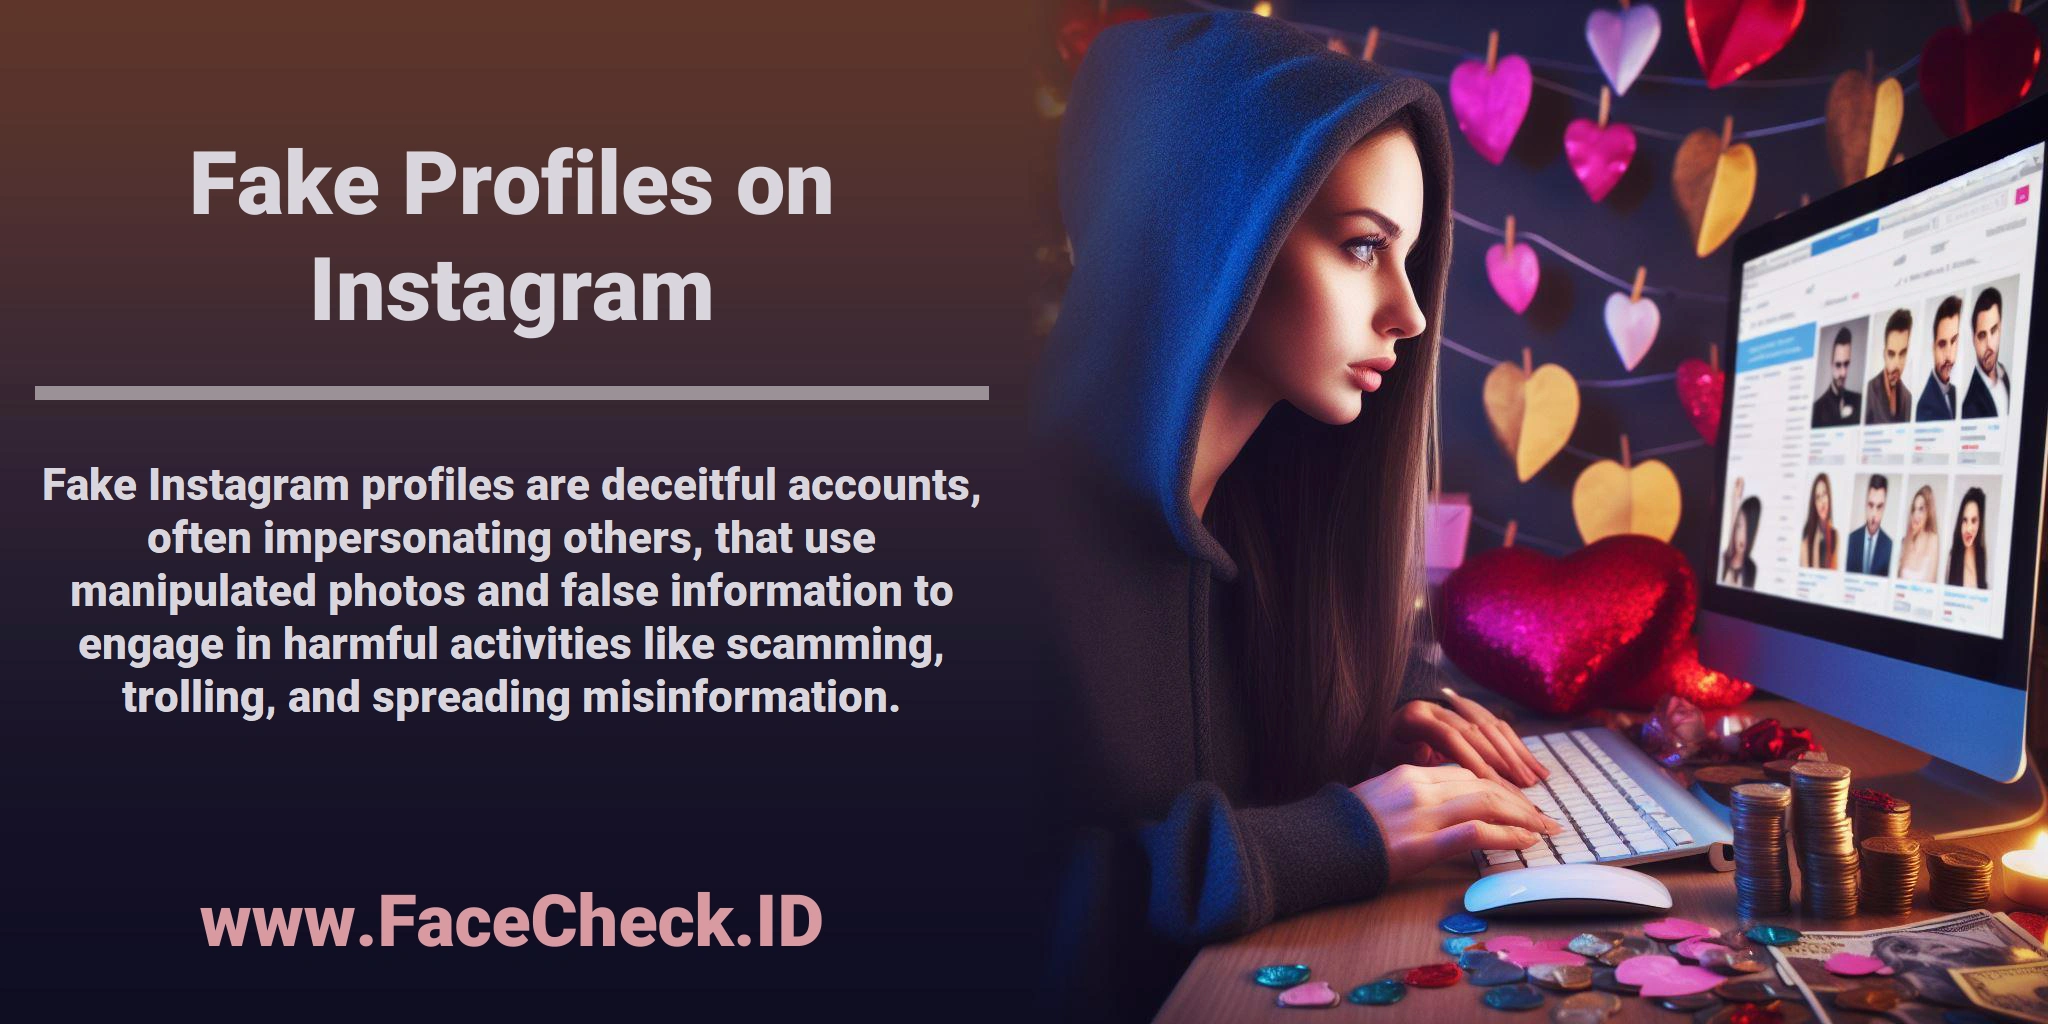 Fake Instagram profiles are deceitful accounts, often impersonating others, that use manipulated photos and false information to engage in harmful activities like scamming, trolling, and spreading misinformation.